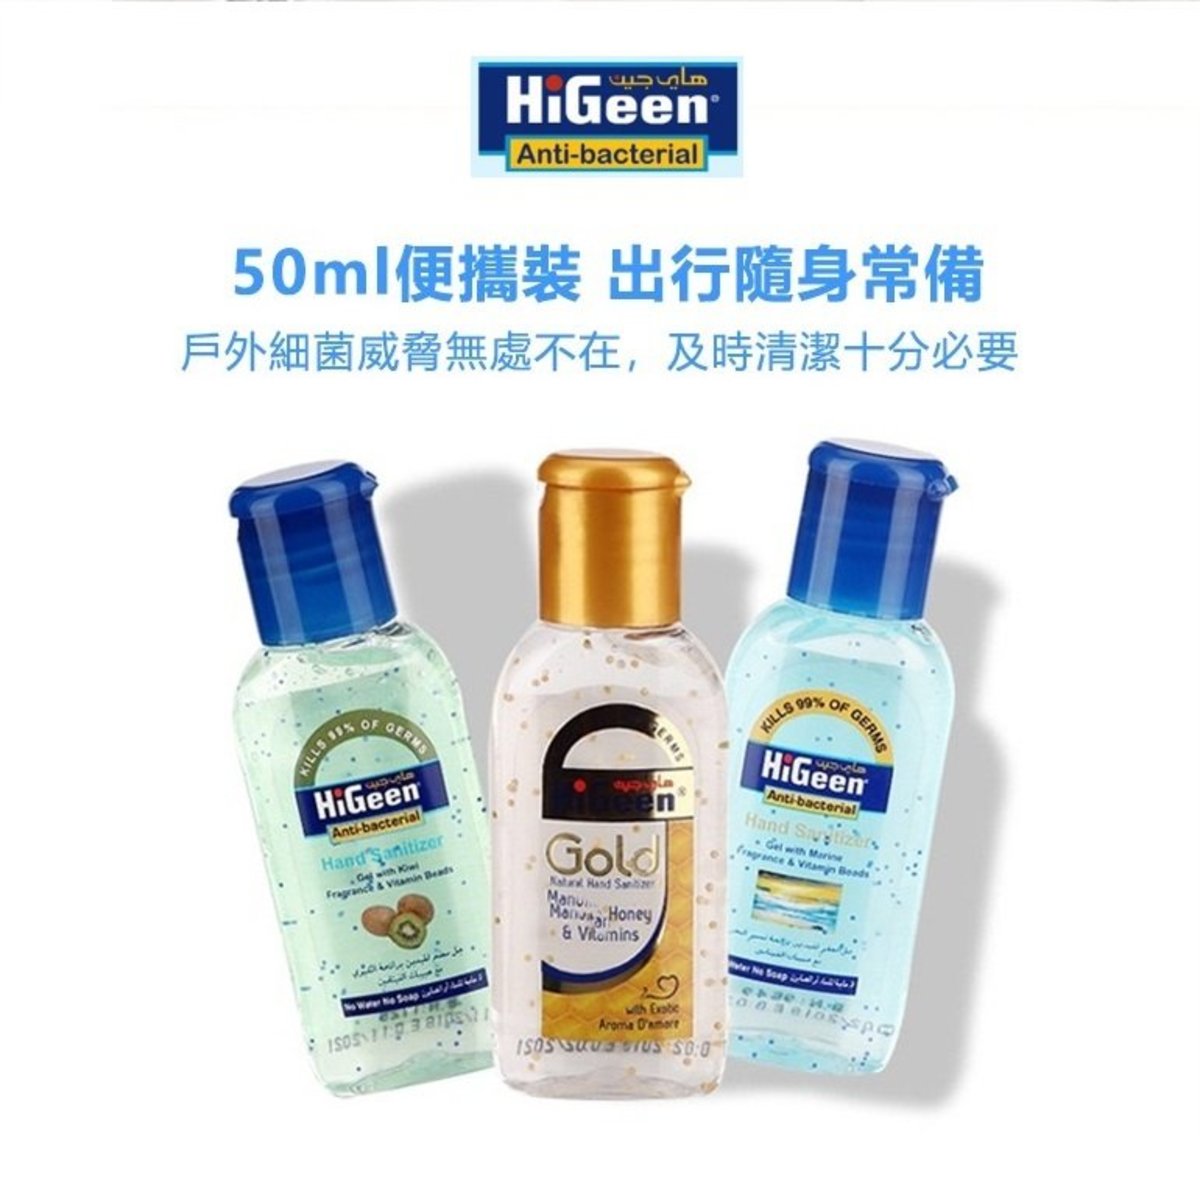 HIGEEN - No-Rinse Alcohol Hand Sanitizer 50ml (Contains 70% Alcohol) - Random Fragrance